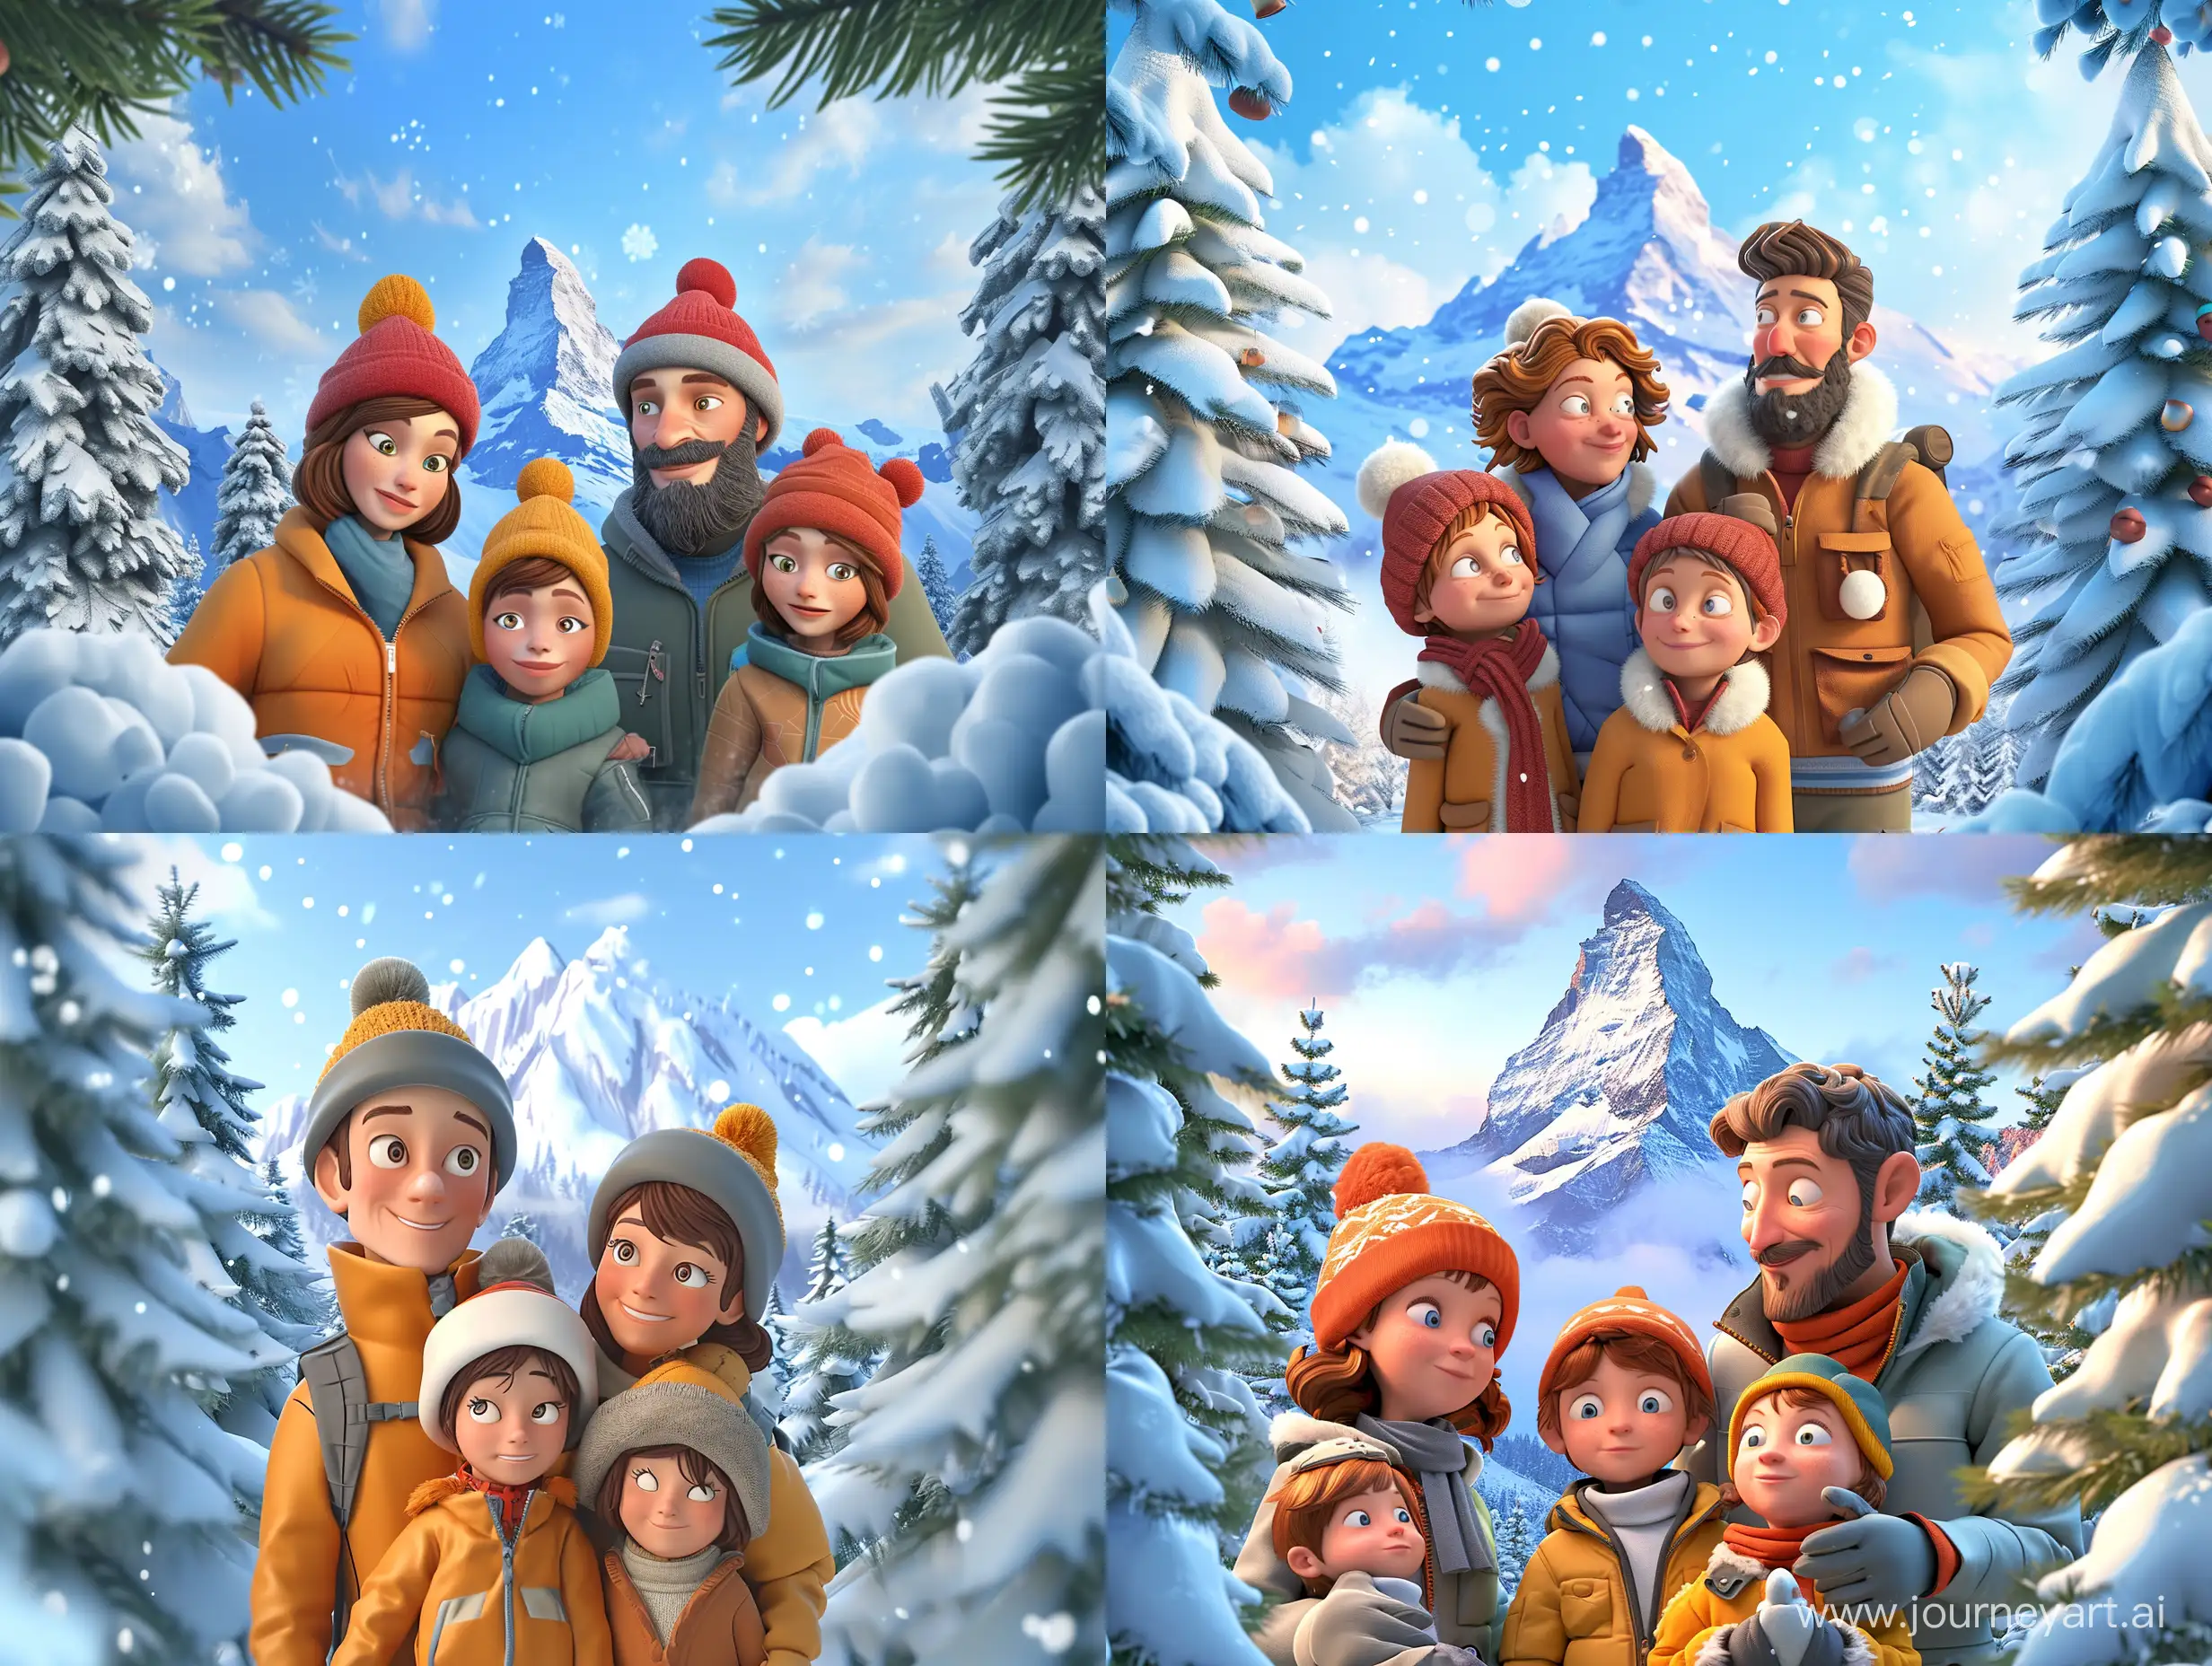 3d style. Family (mom dad and 2 kids) looking at us who is dressed in warm winter gear and in the background is a snowy mountain, and on the sides are snowy fir trees